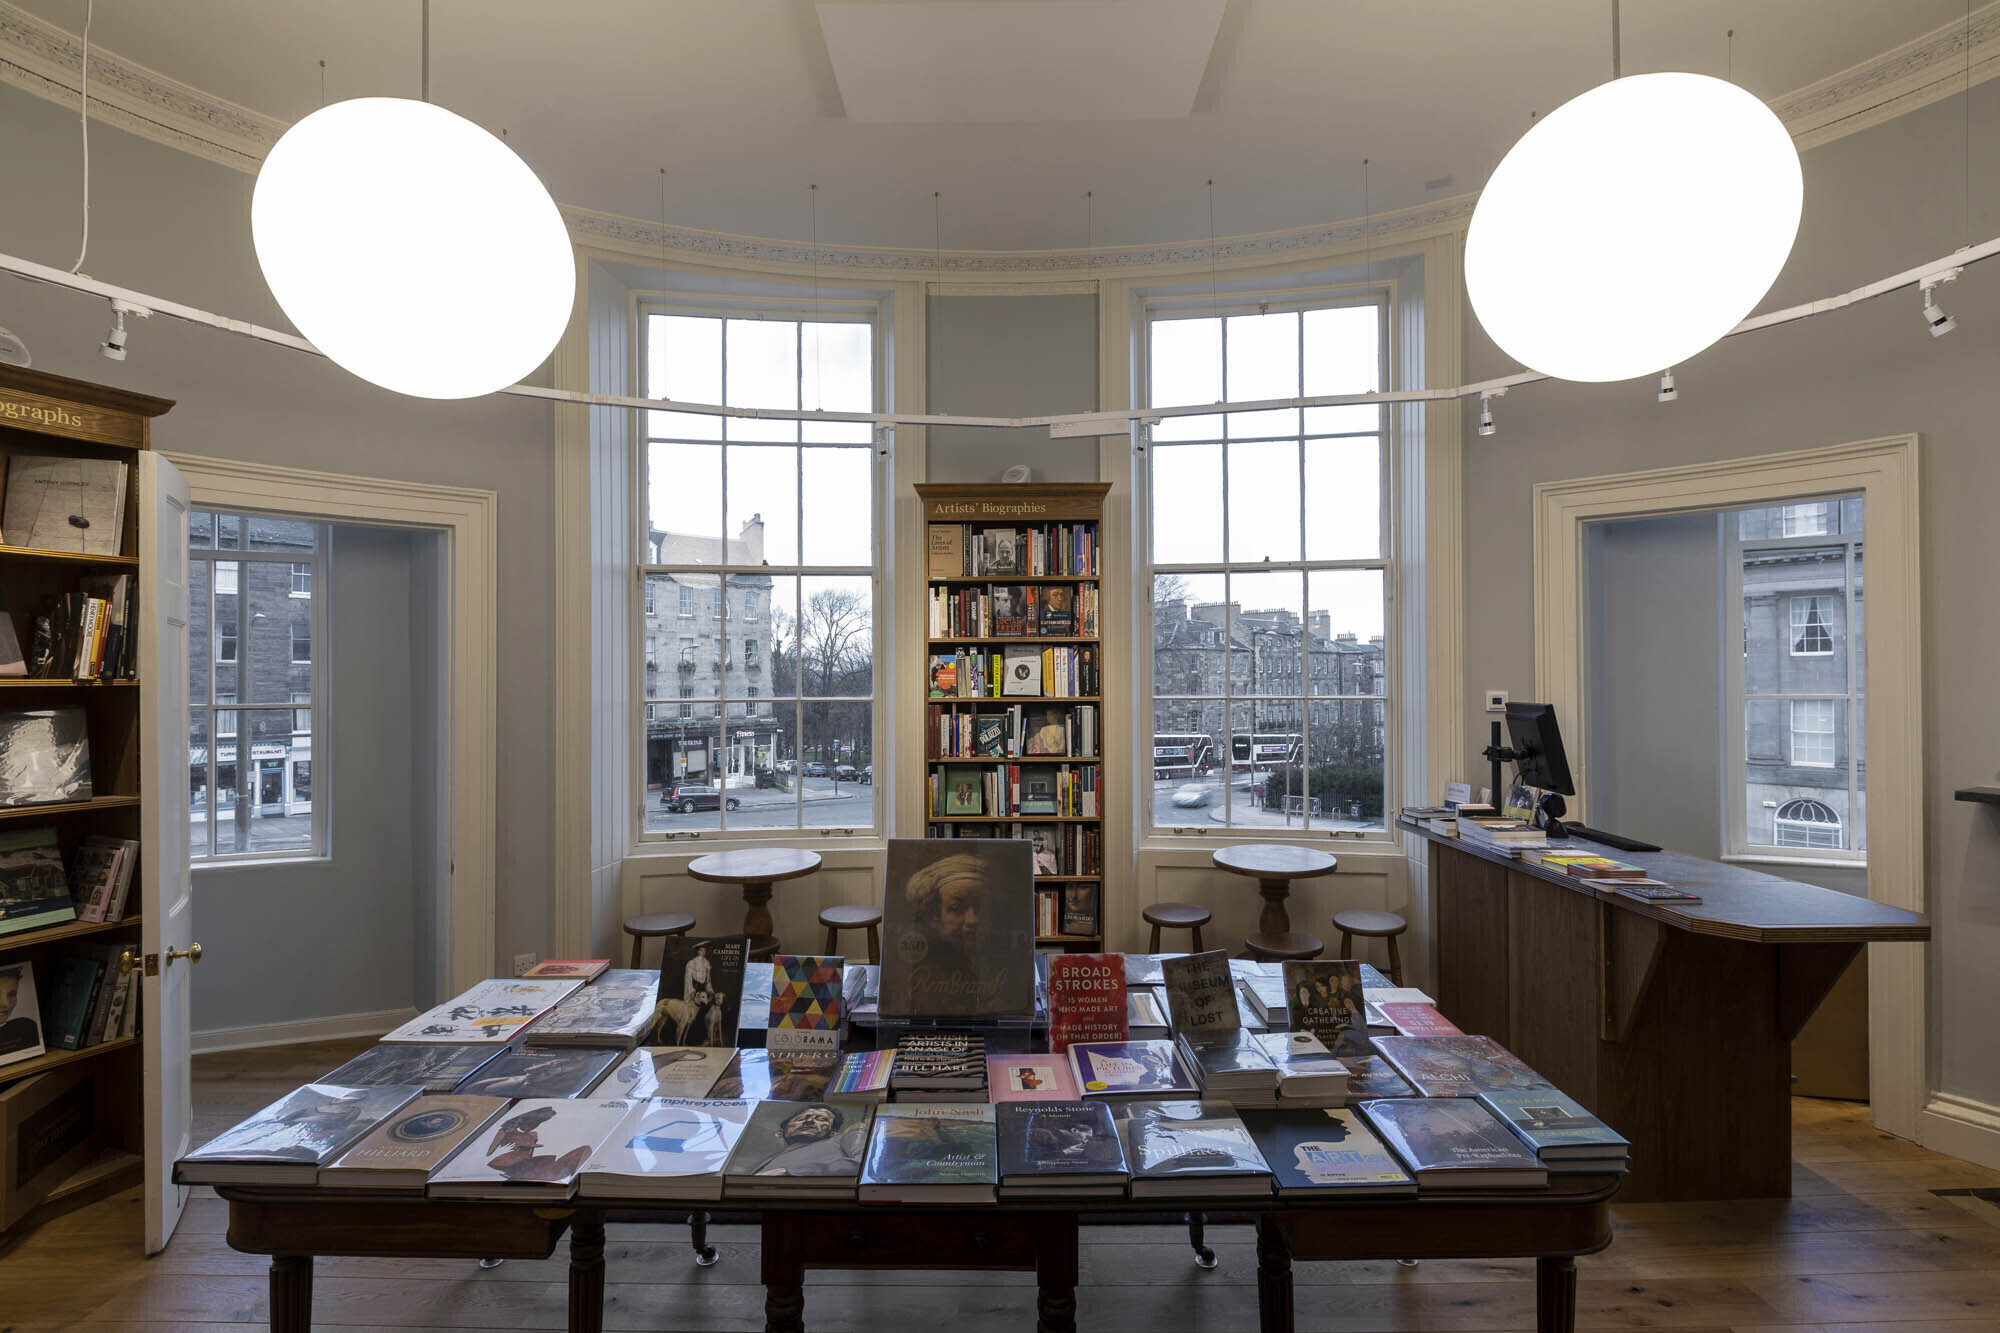 Inside the first floor of Topping and Company booksellers, Edinburgh. A round room with windows side-by side and doors at either side. Shelves, a counter and a table, which is stacked with art books. Stools and tables are sited by the window.